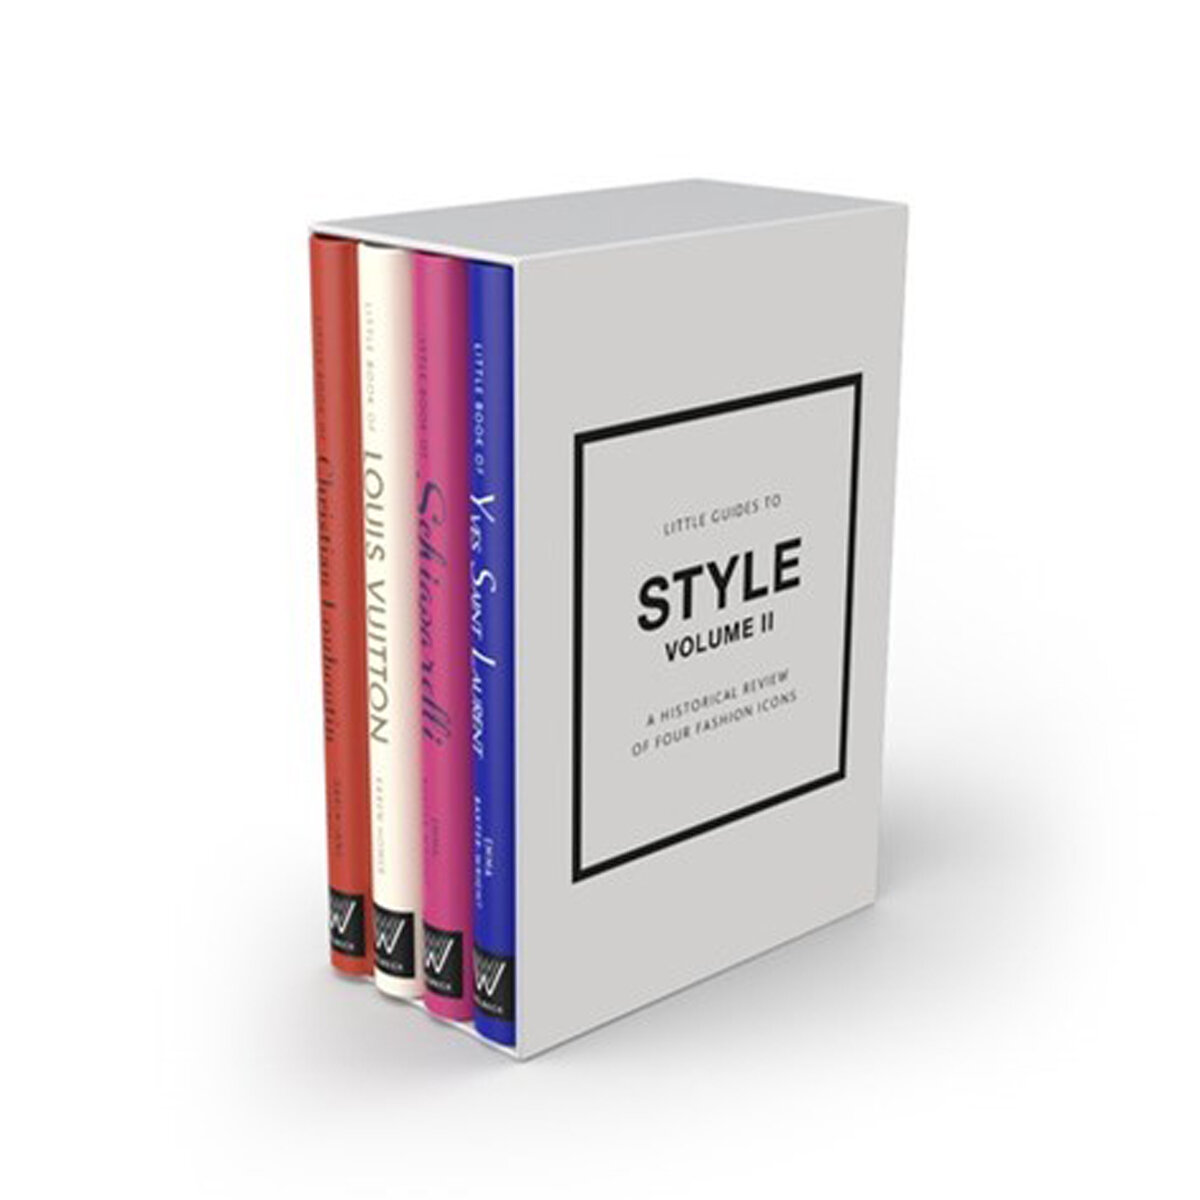 Little Guides to Style: Volume II A Historical Review of Four Fashion  Icons